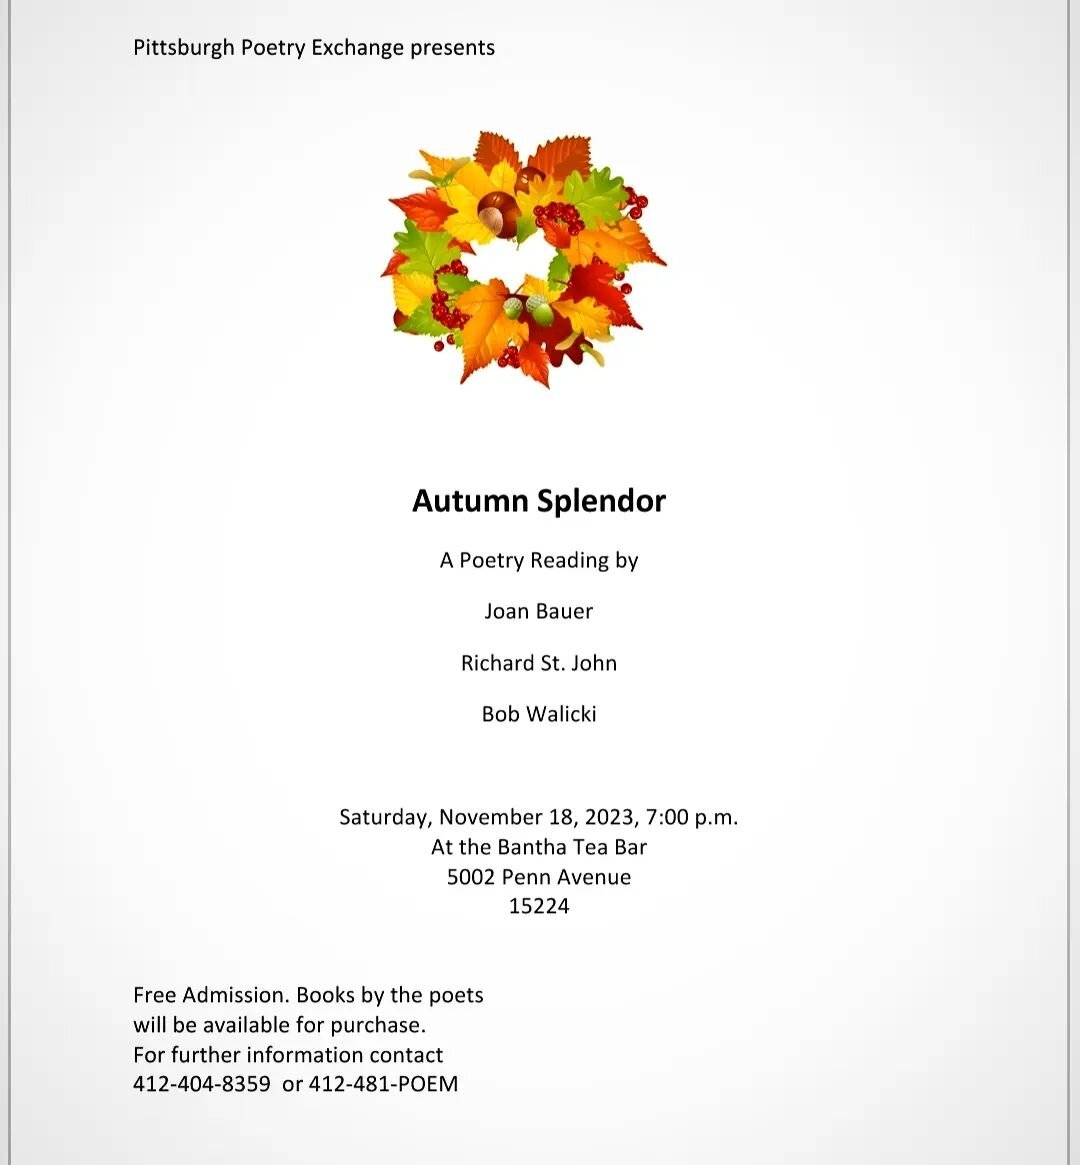 Autumn Splendor!! Poetry reading on Saturday, the 18th of November 🍂🍁 Free Admission, starting at 7PM

#vegan #glutenfree #banthateabar #teabar #pghbusiness #pittsburghbusiness #shoplocal
#pghtea #pghcoffee #pittsburghcoffee #ecofriendly #reuseable